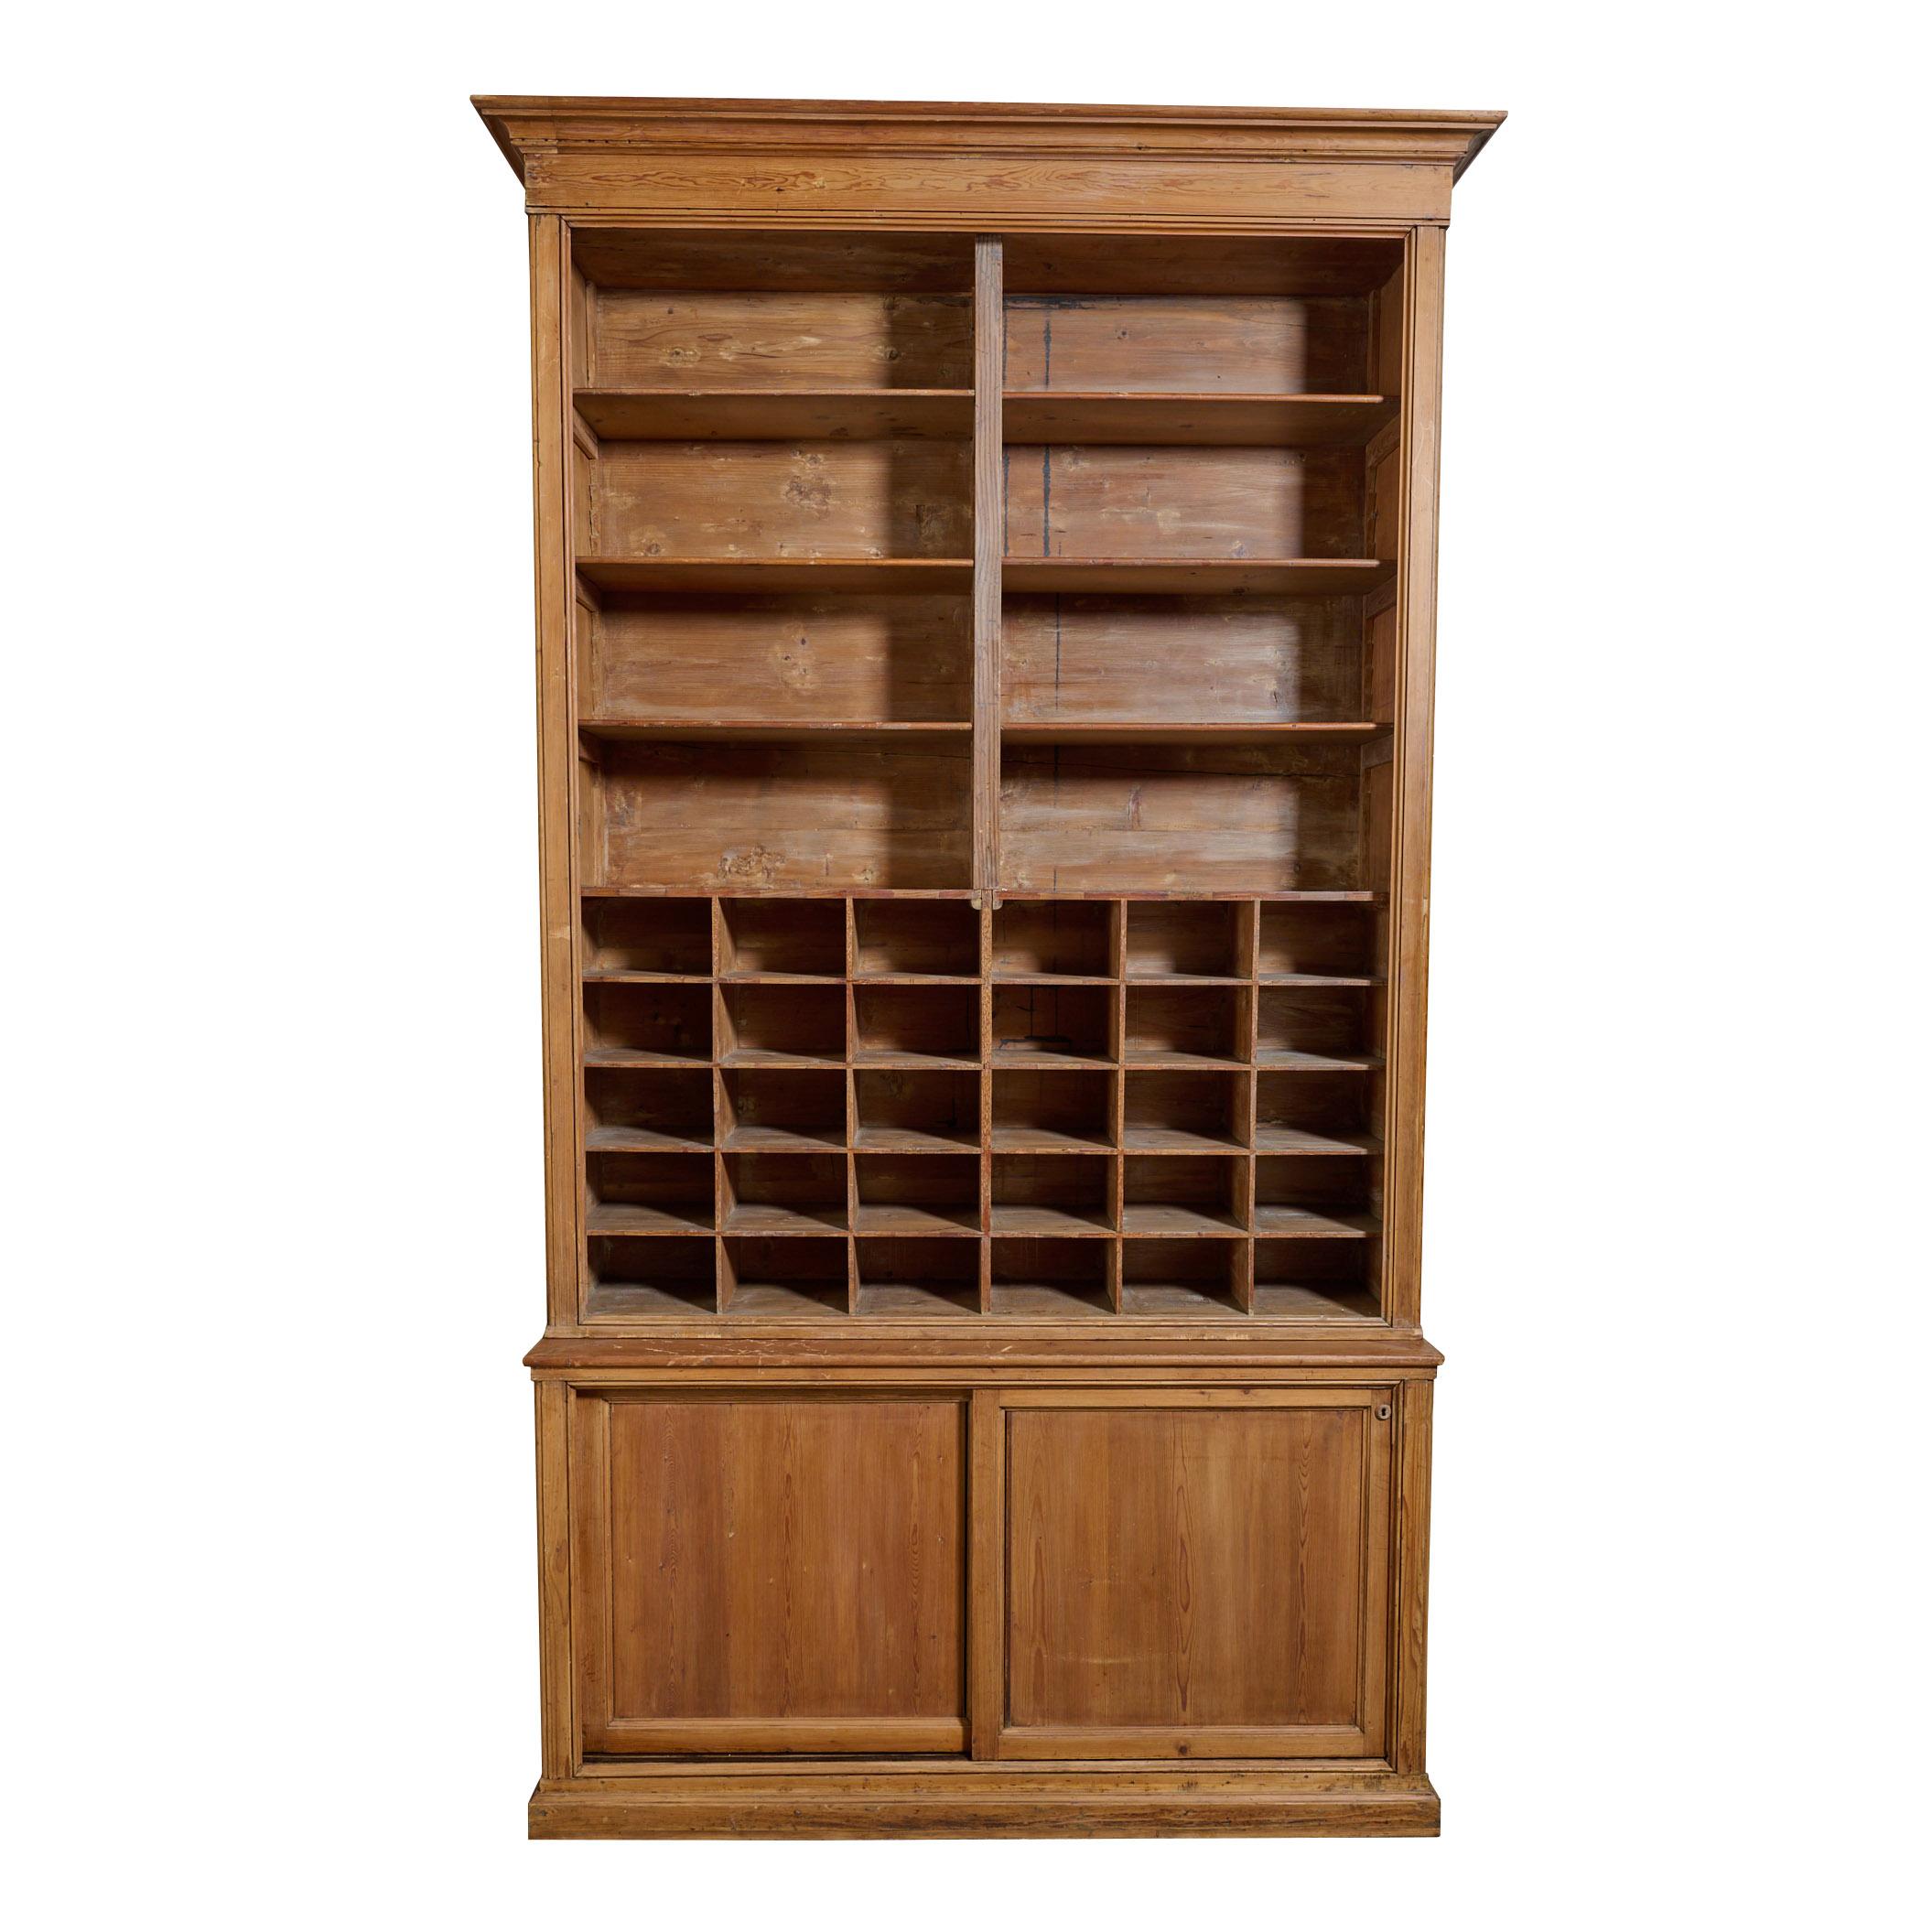 The best two tier pine cabinet with shelving, cubby holes, and base cabinet. Fantastic Quality. Two available, priced per single unit.